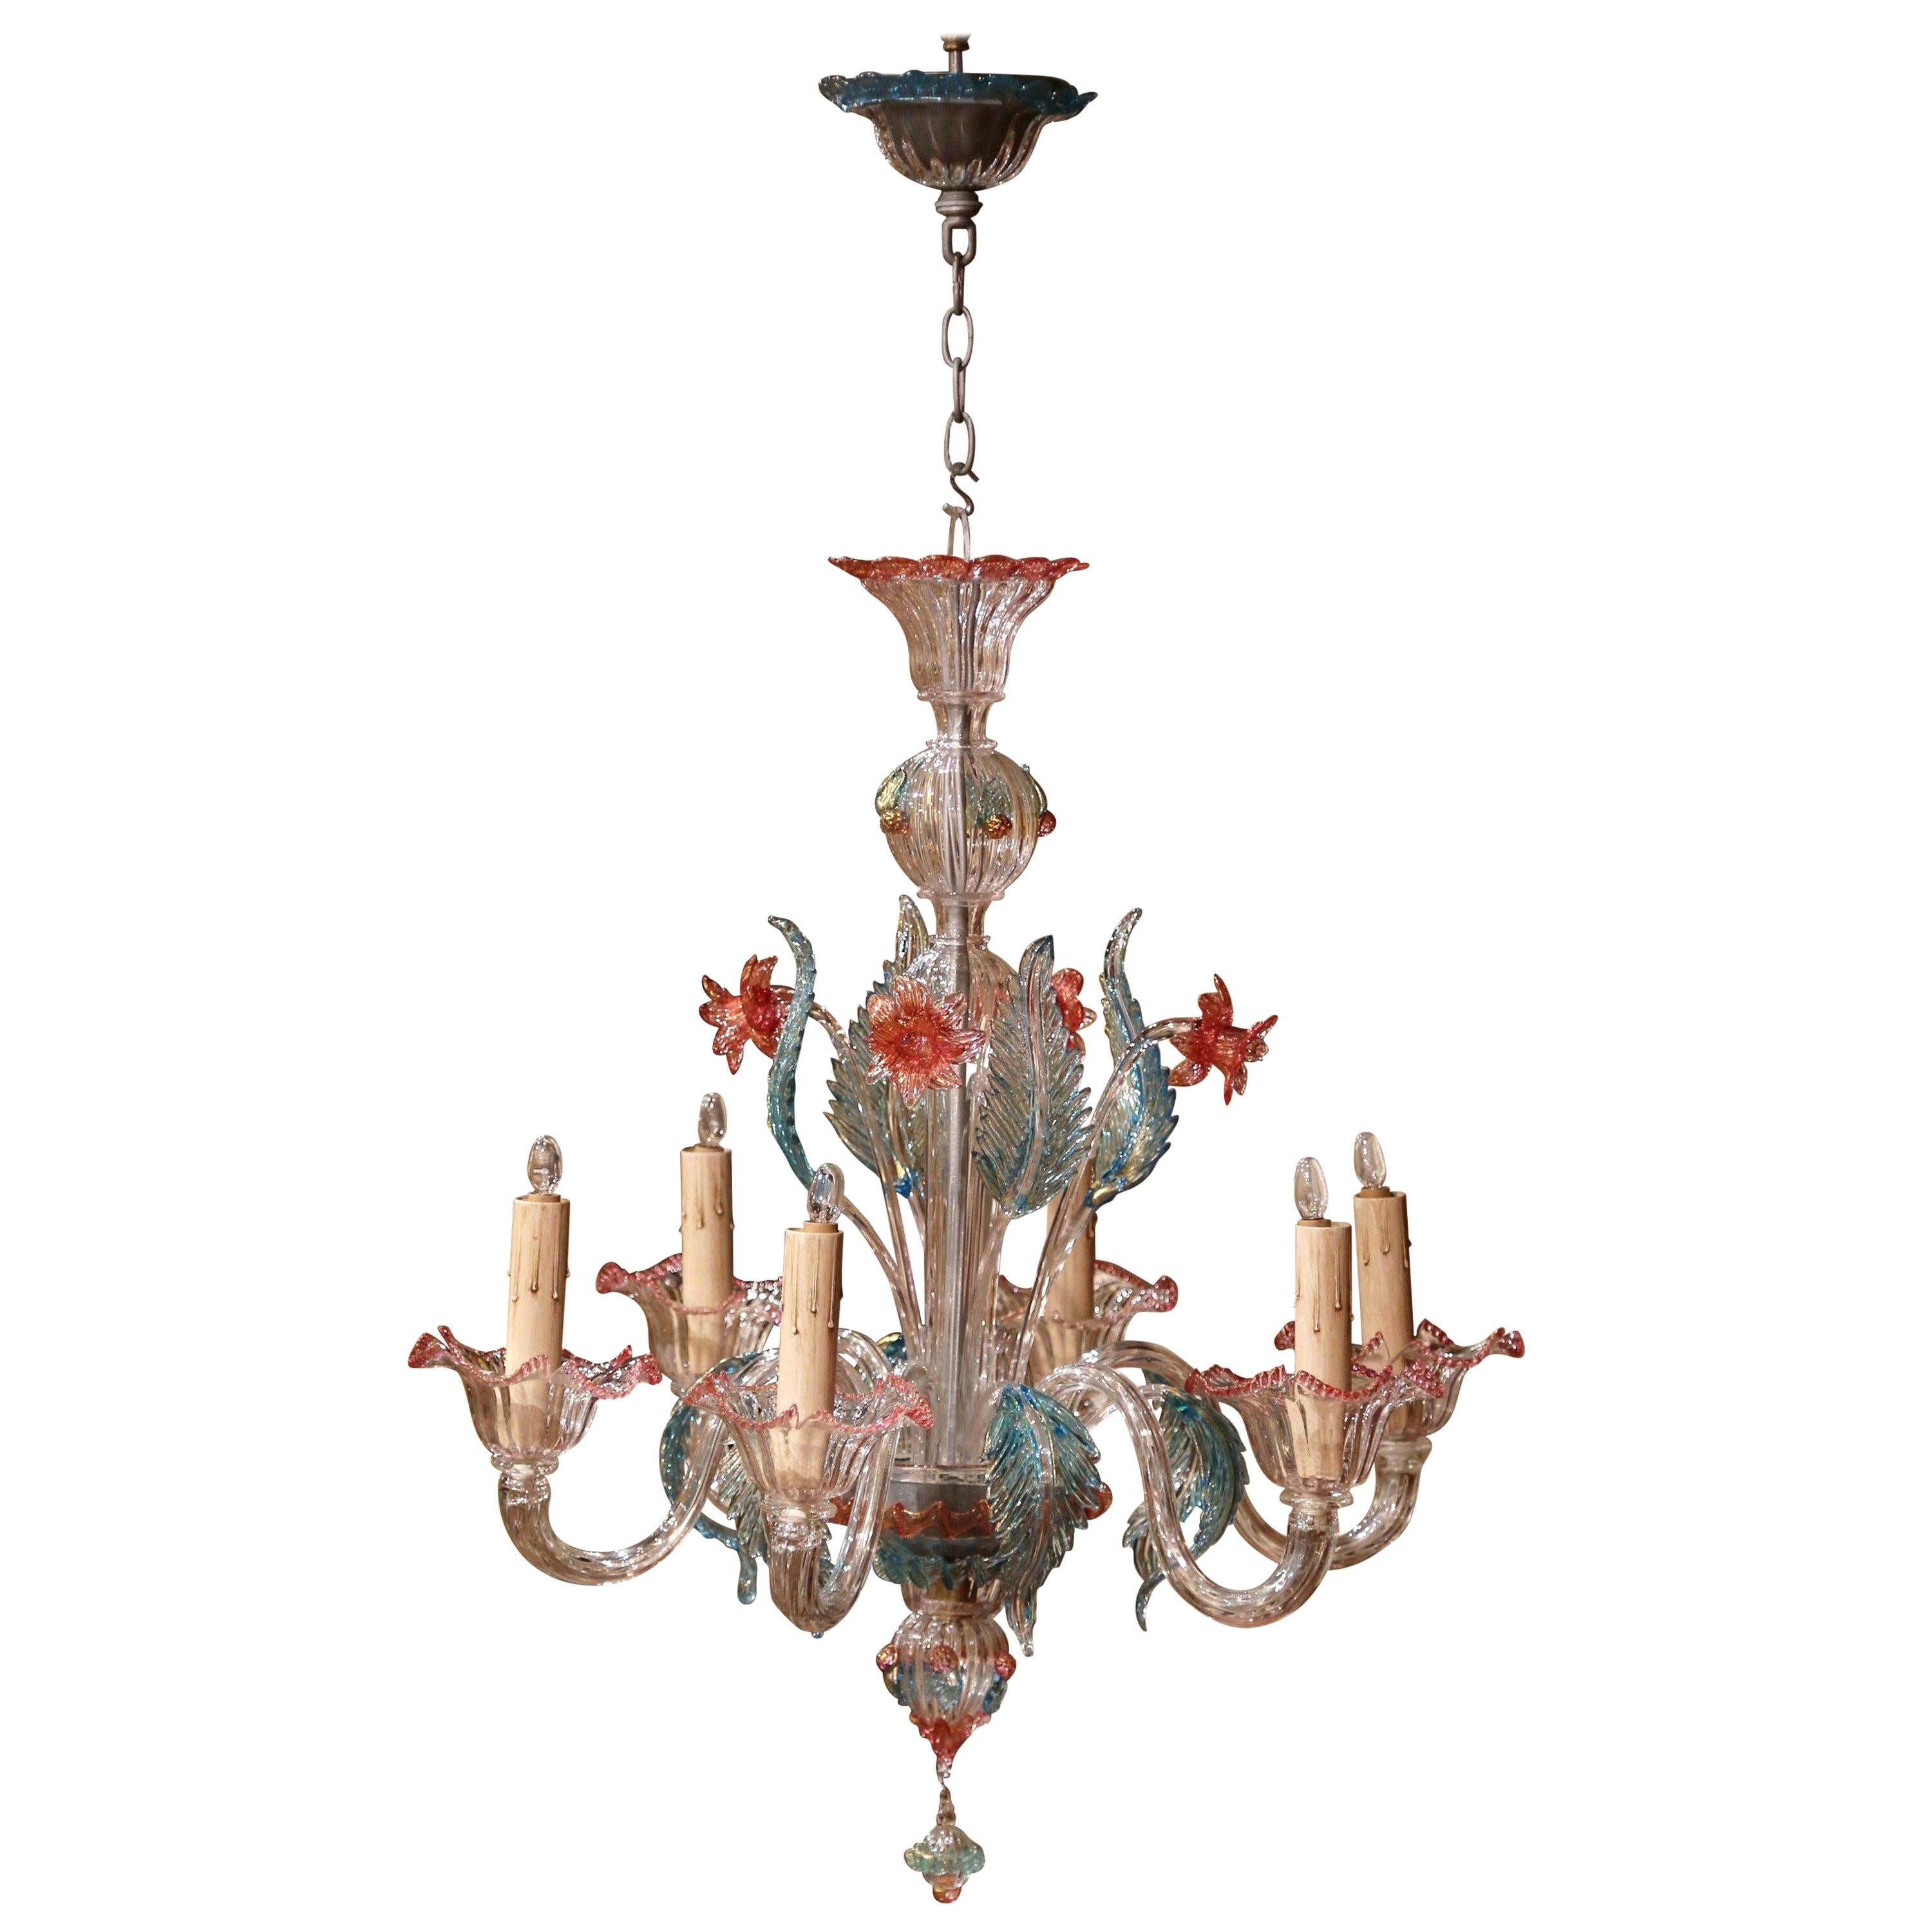 20th Century Italian Blown Glass Murano Six-Light Chandelier with Floral Motifs